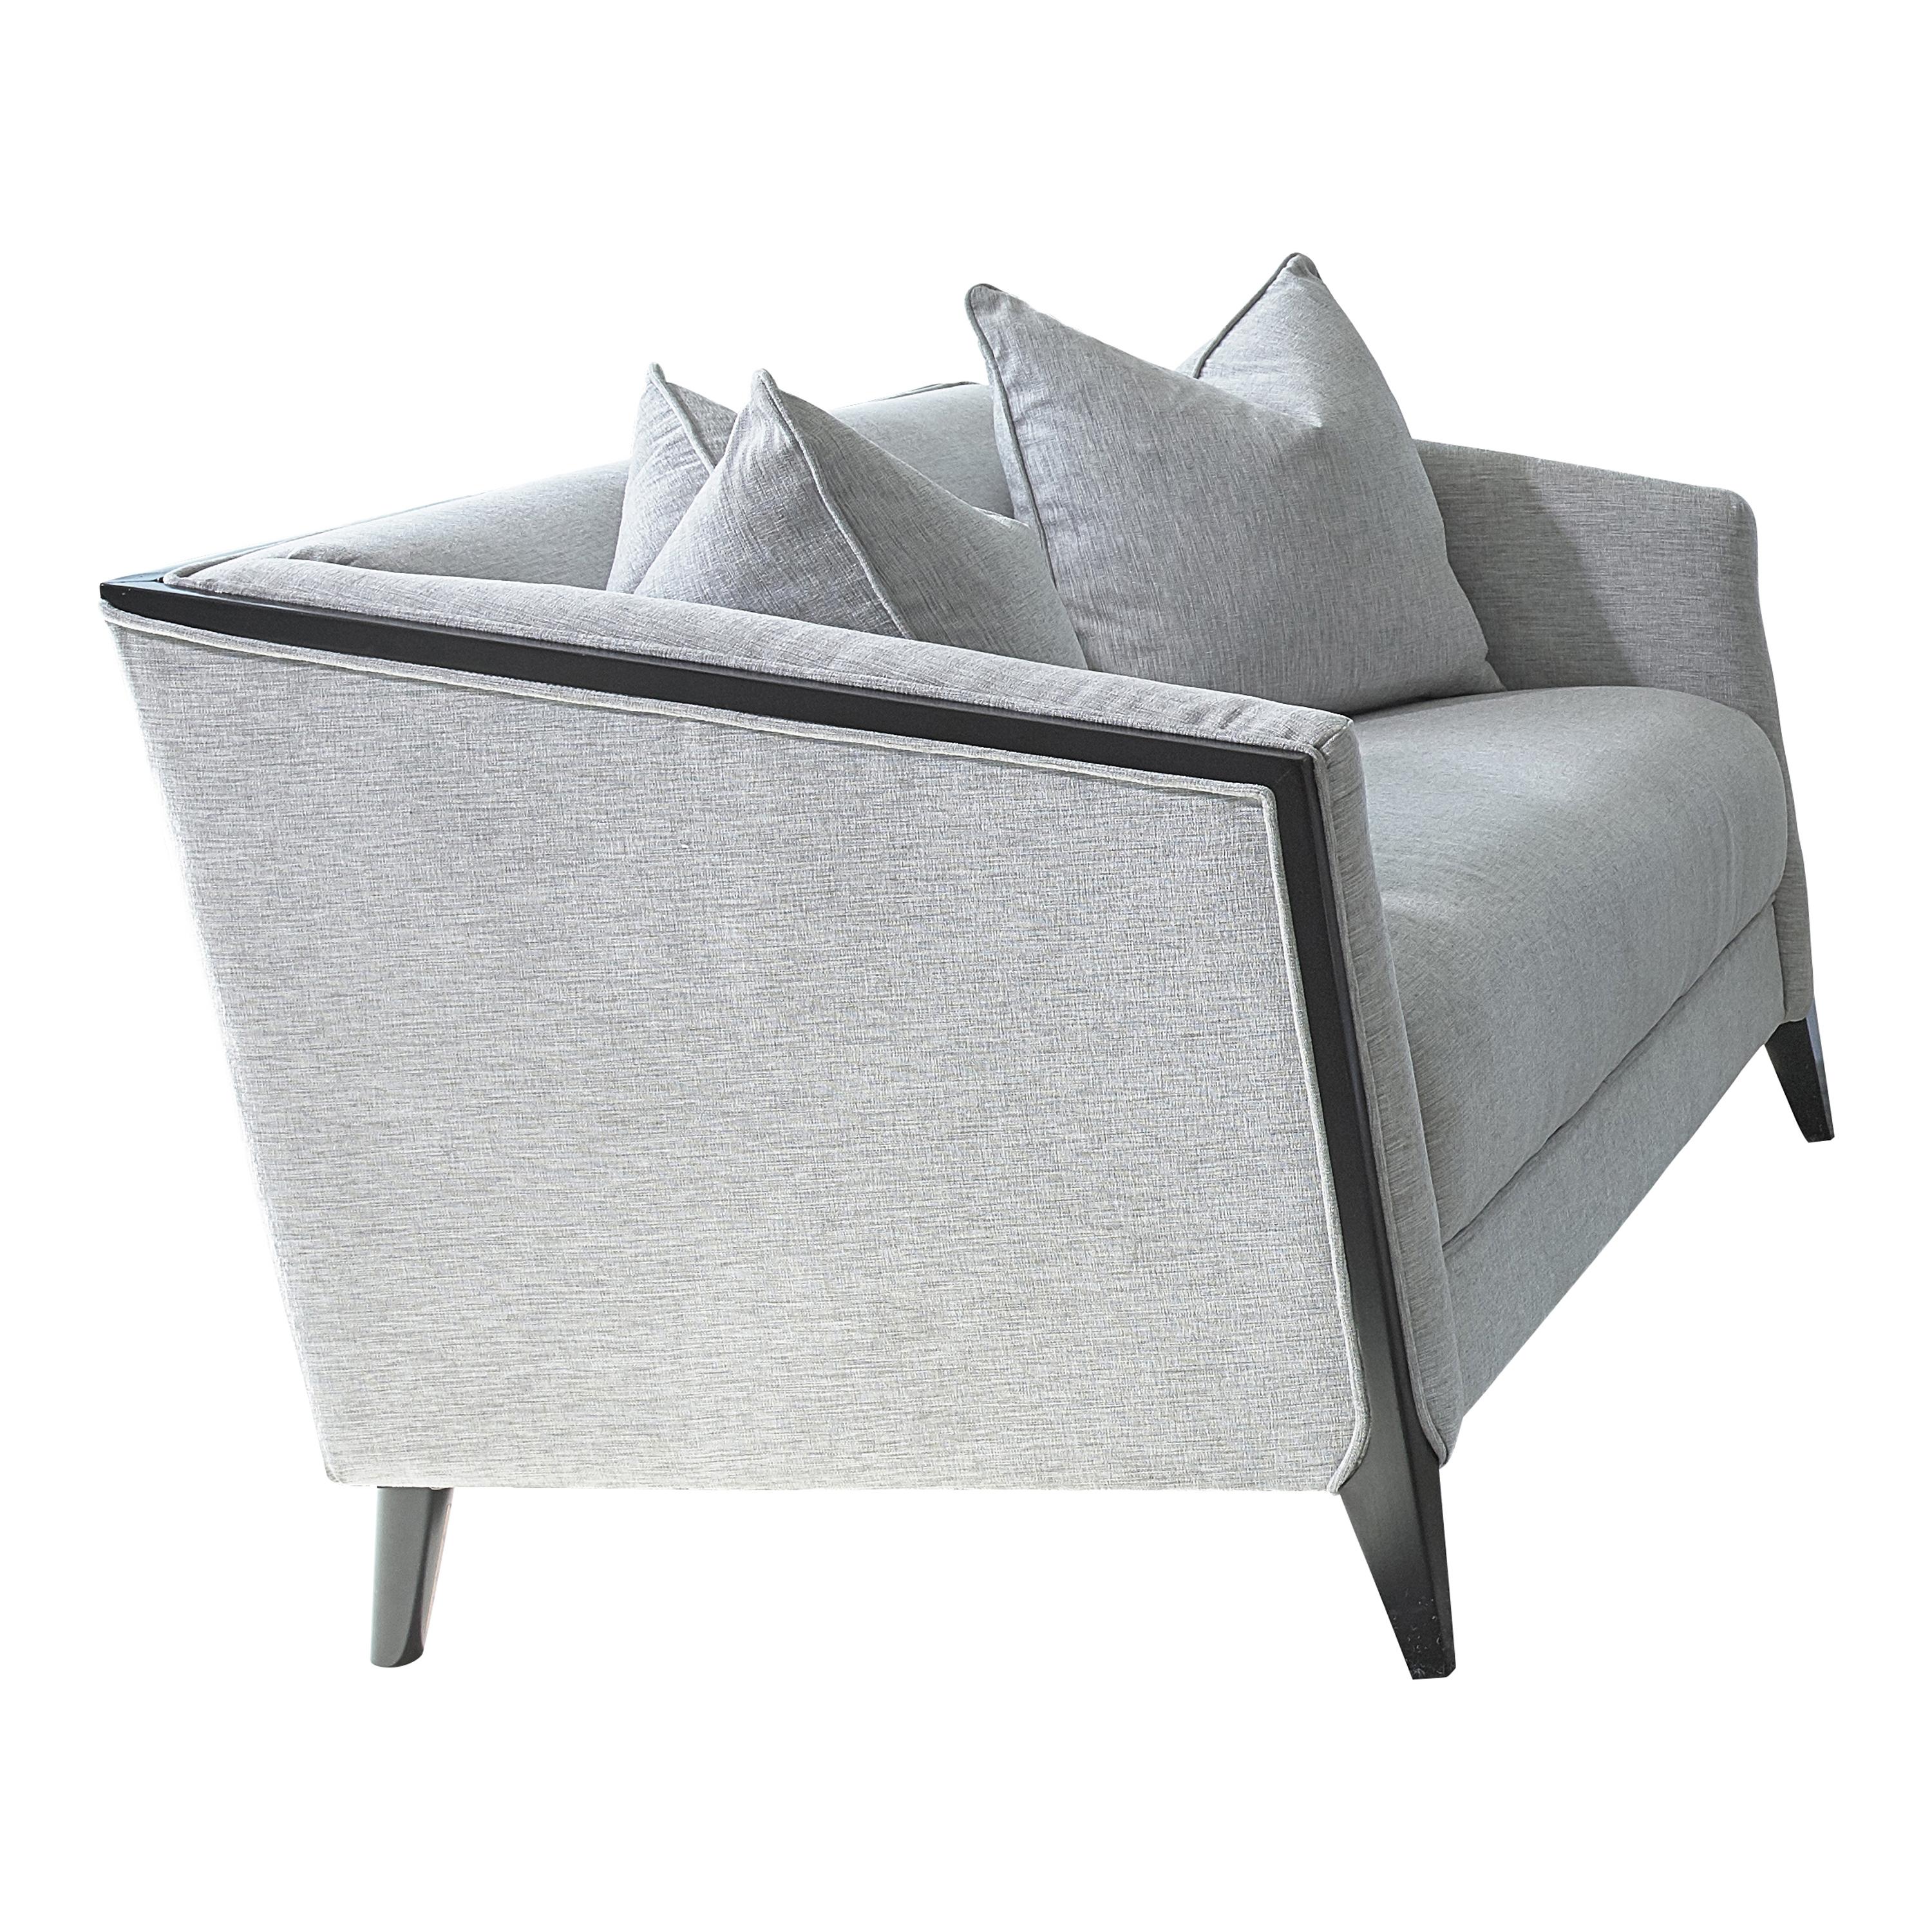 Transitional Loveseat 509202 Whitfield 509202 in Gray Chenille